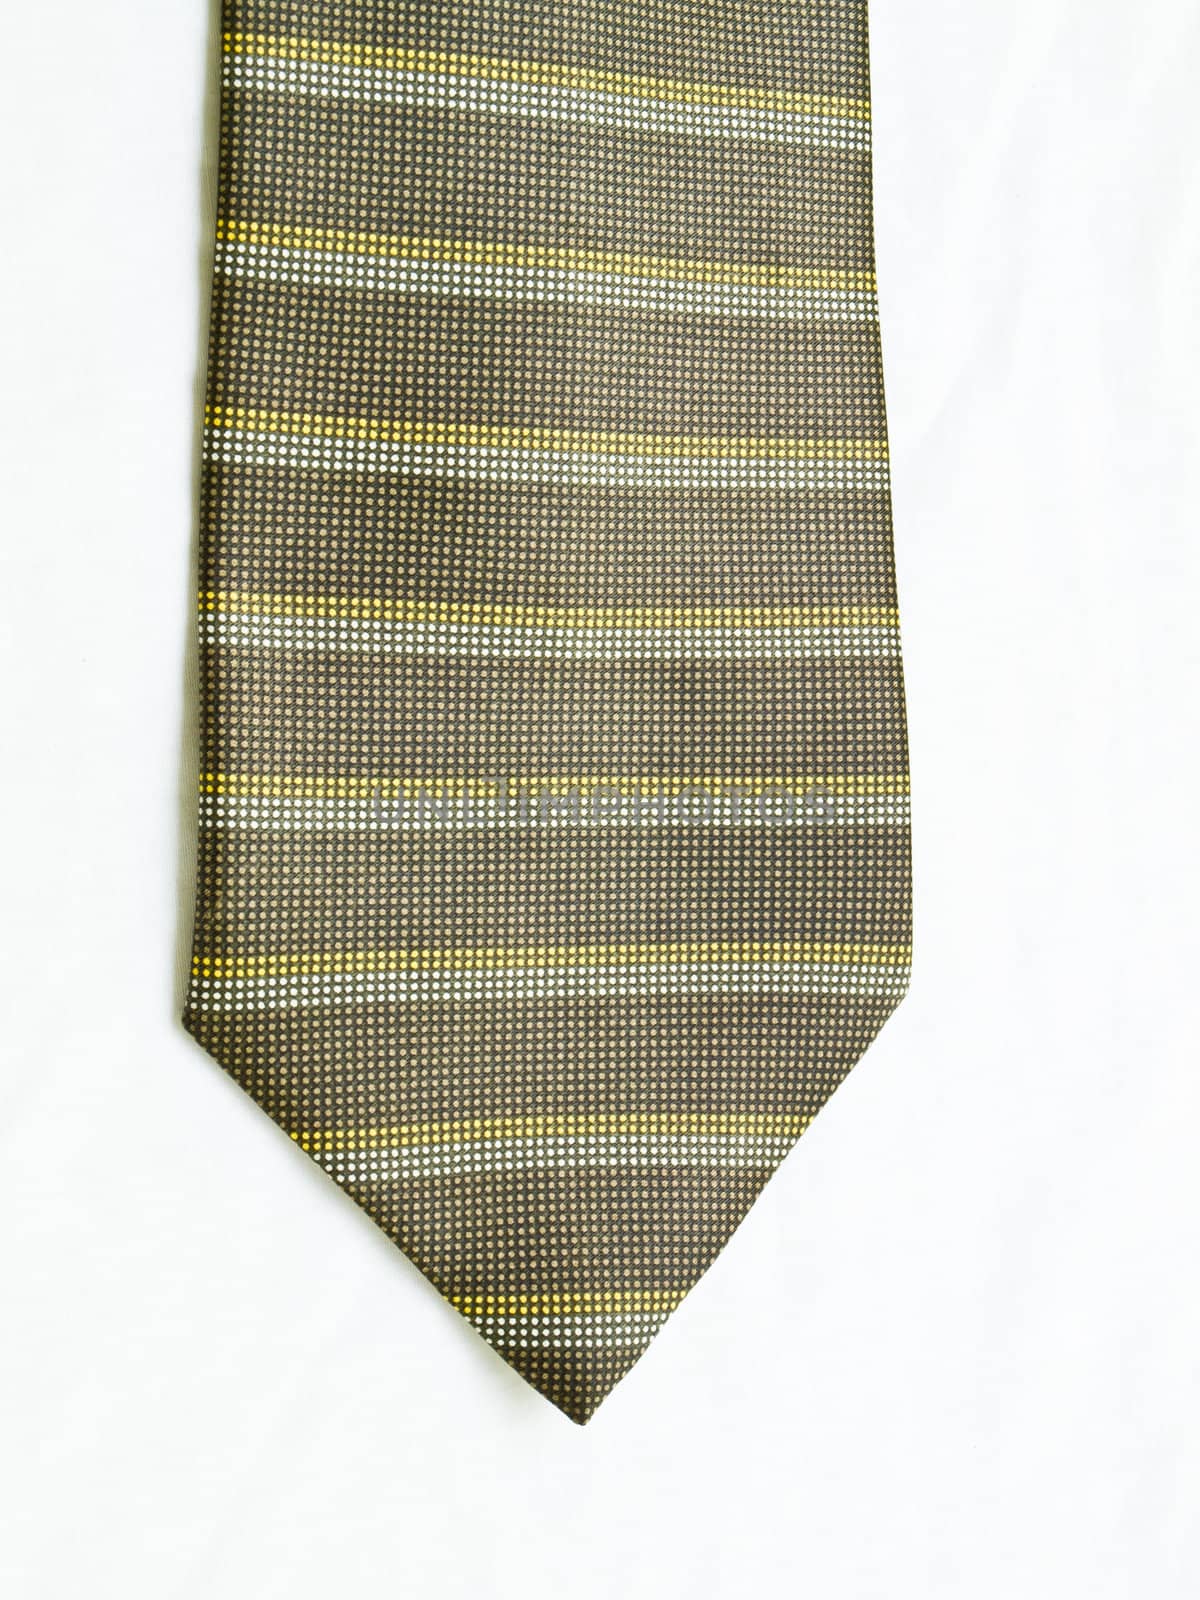 A striped yellow and black tie isolated on white background.